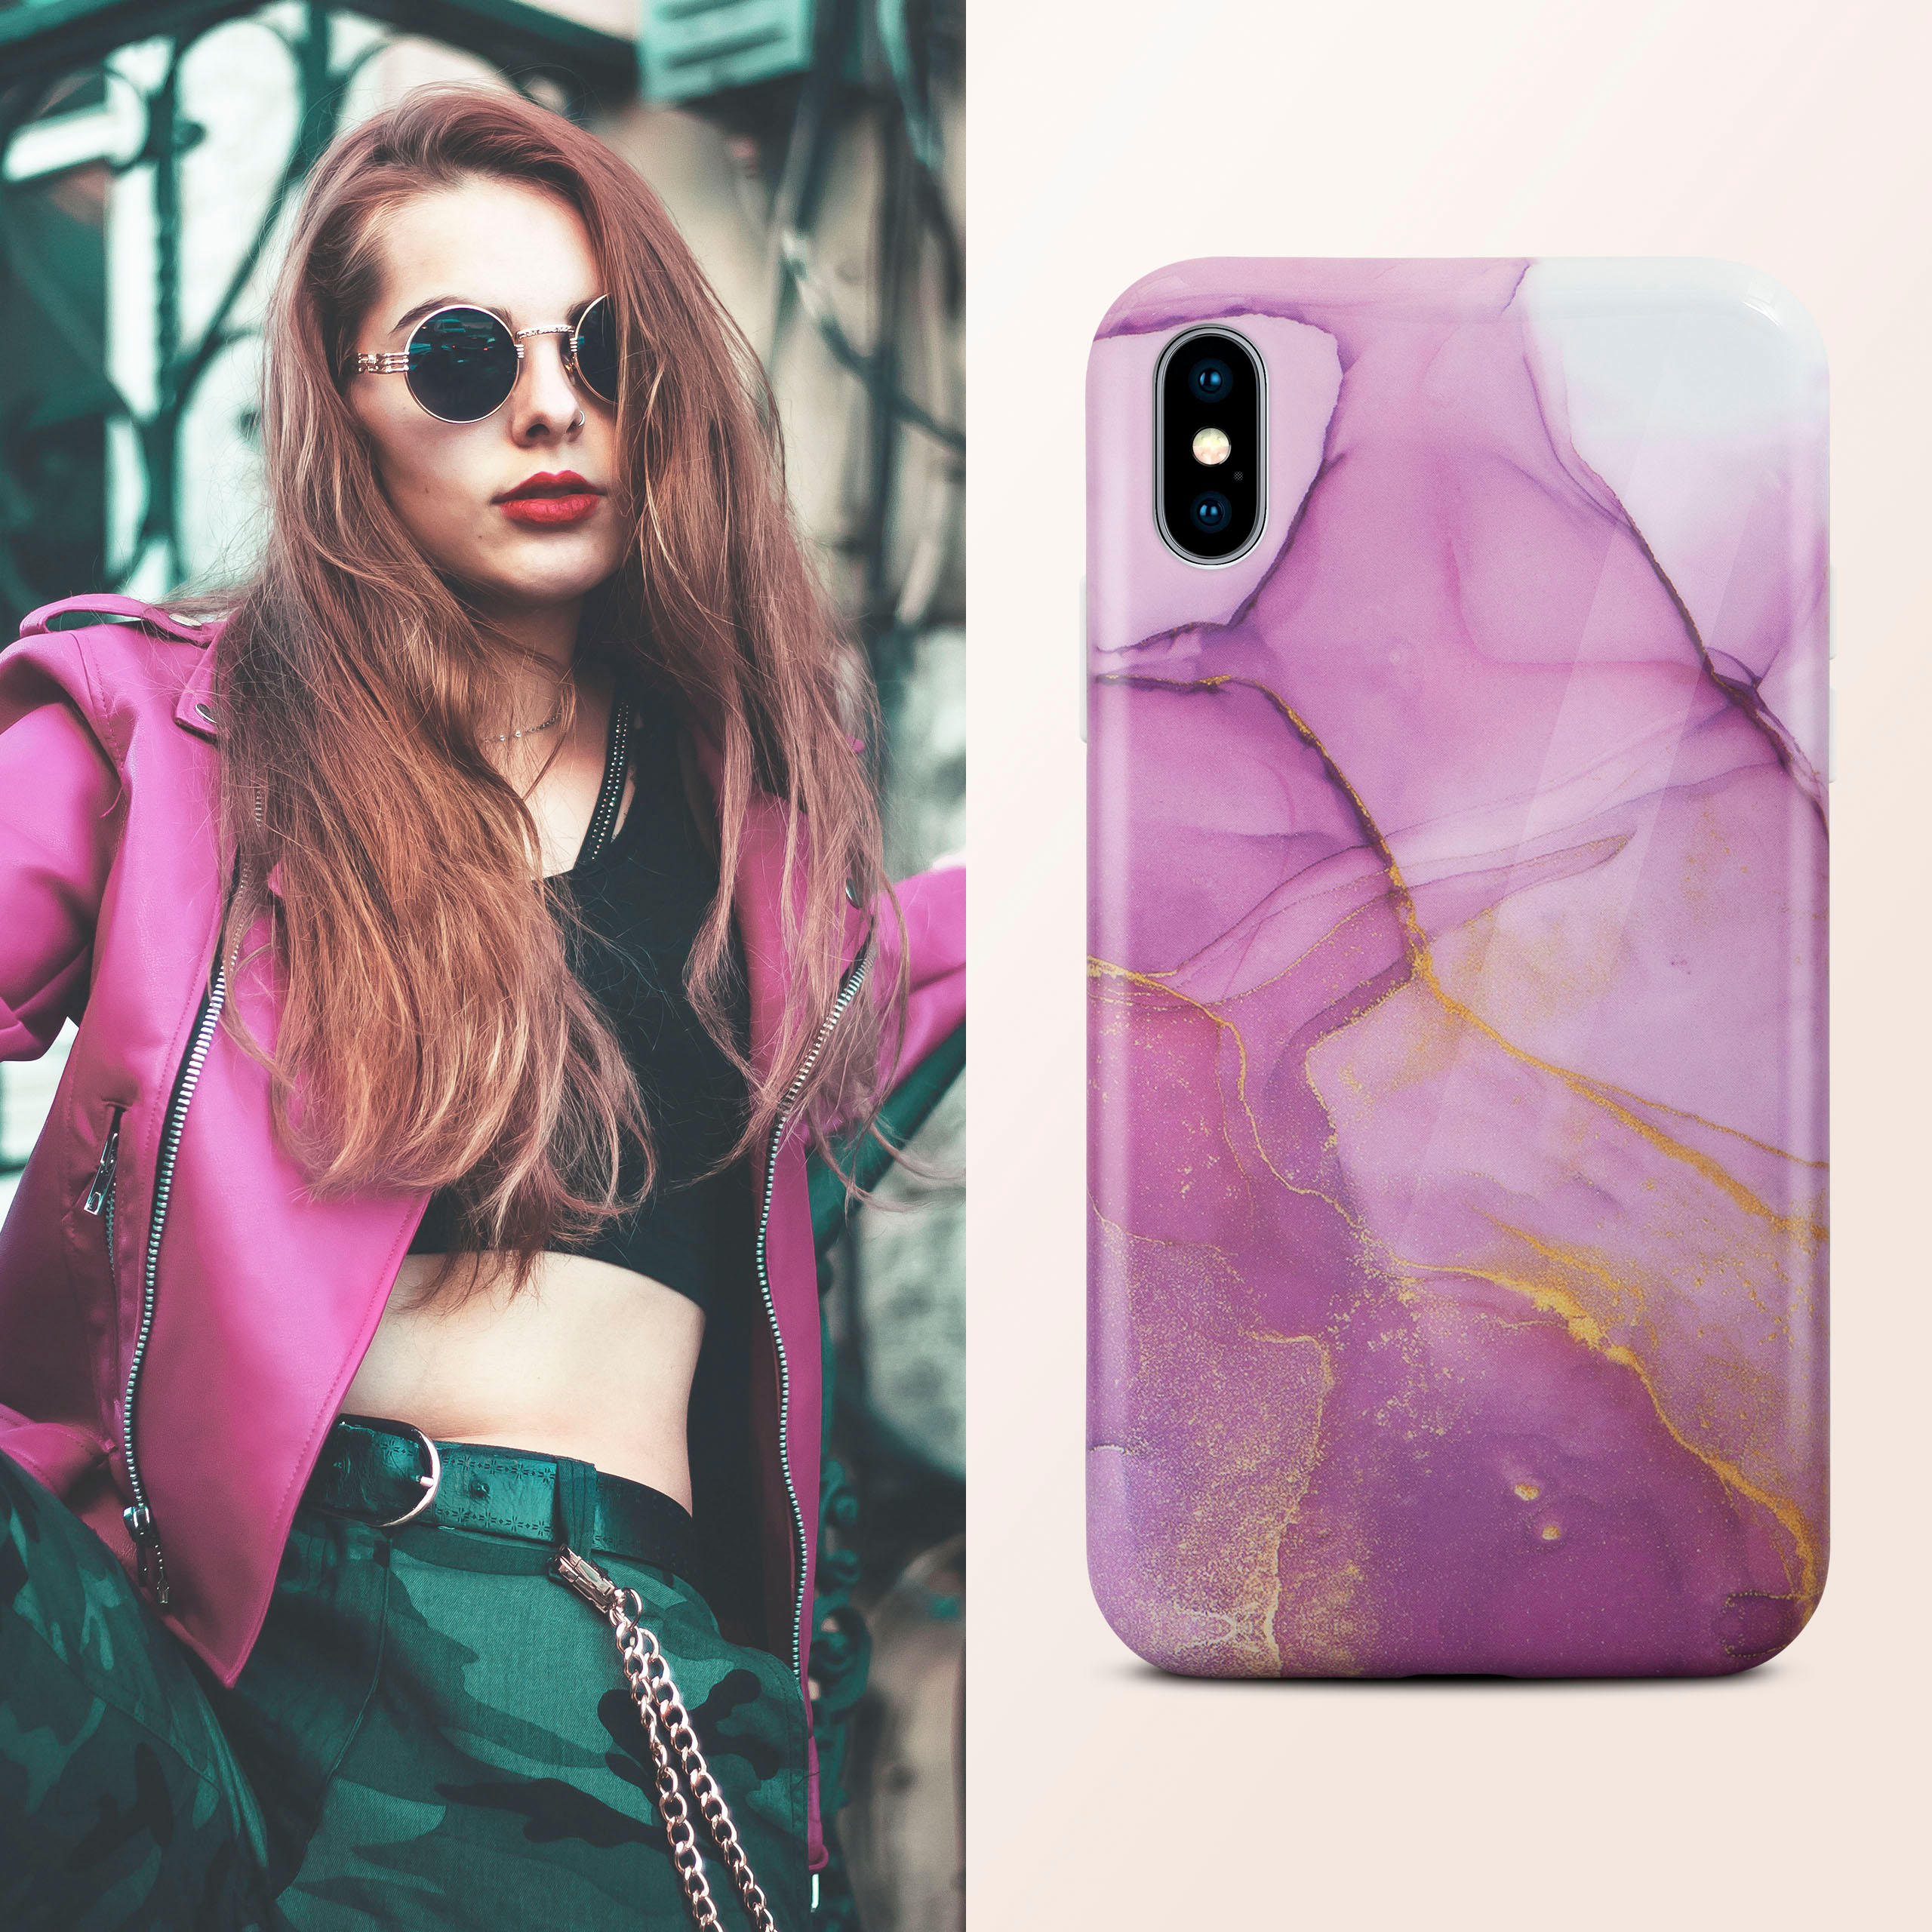 ONEFLOW Backcover, Sense Apple, X iPhone / iPhone XS, Affection Case,